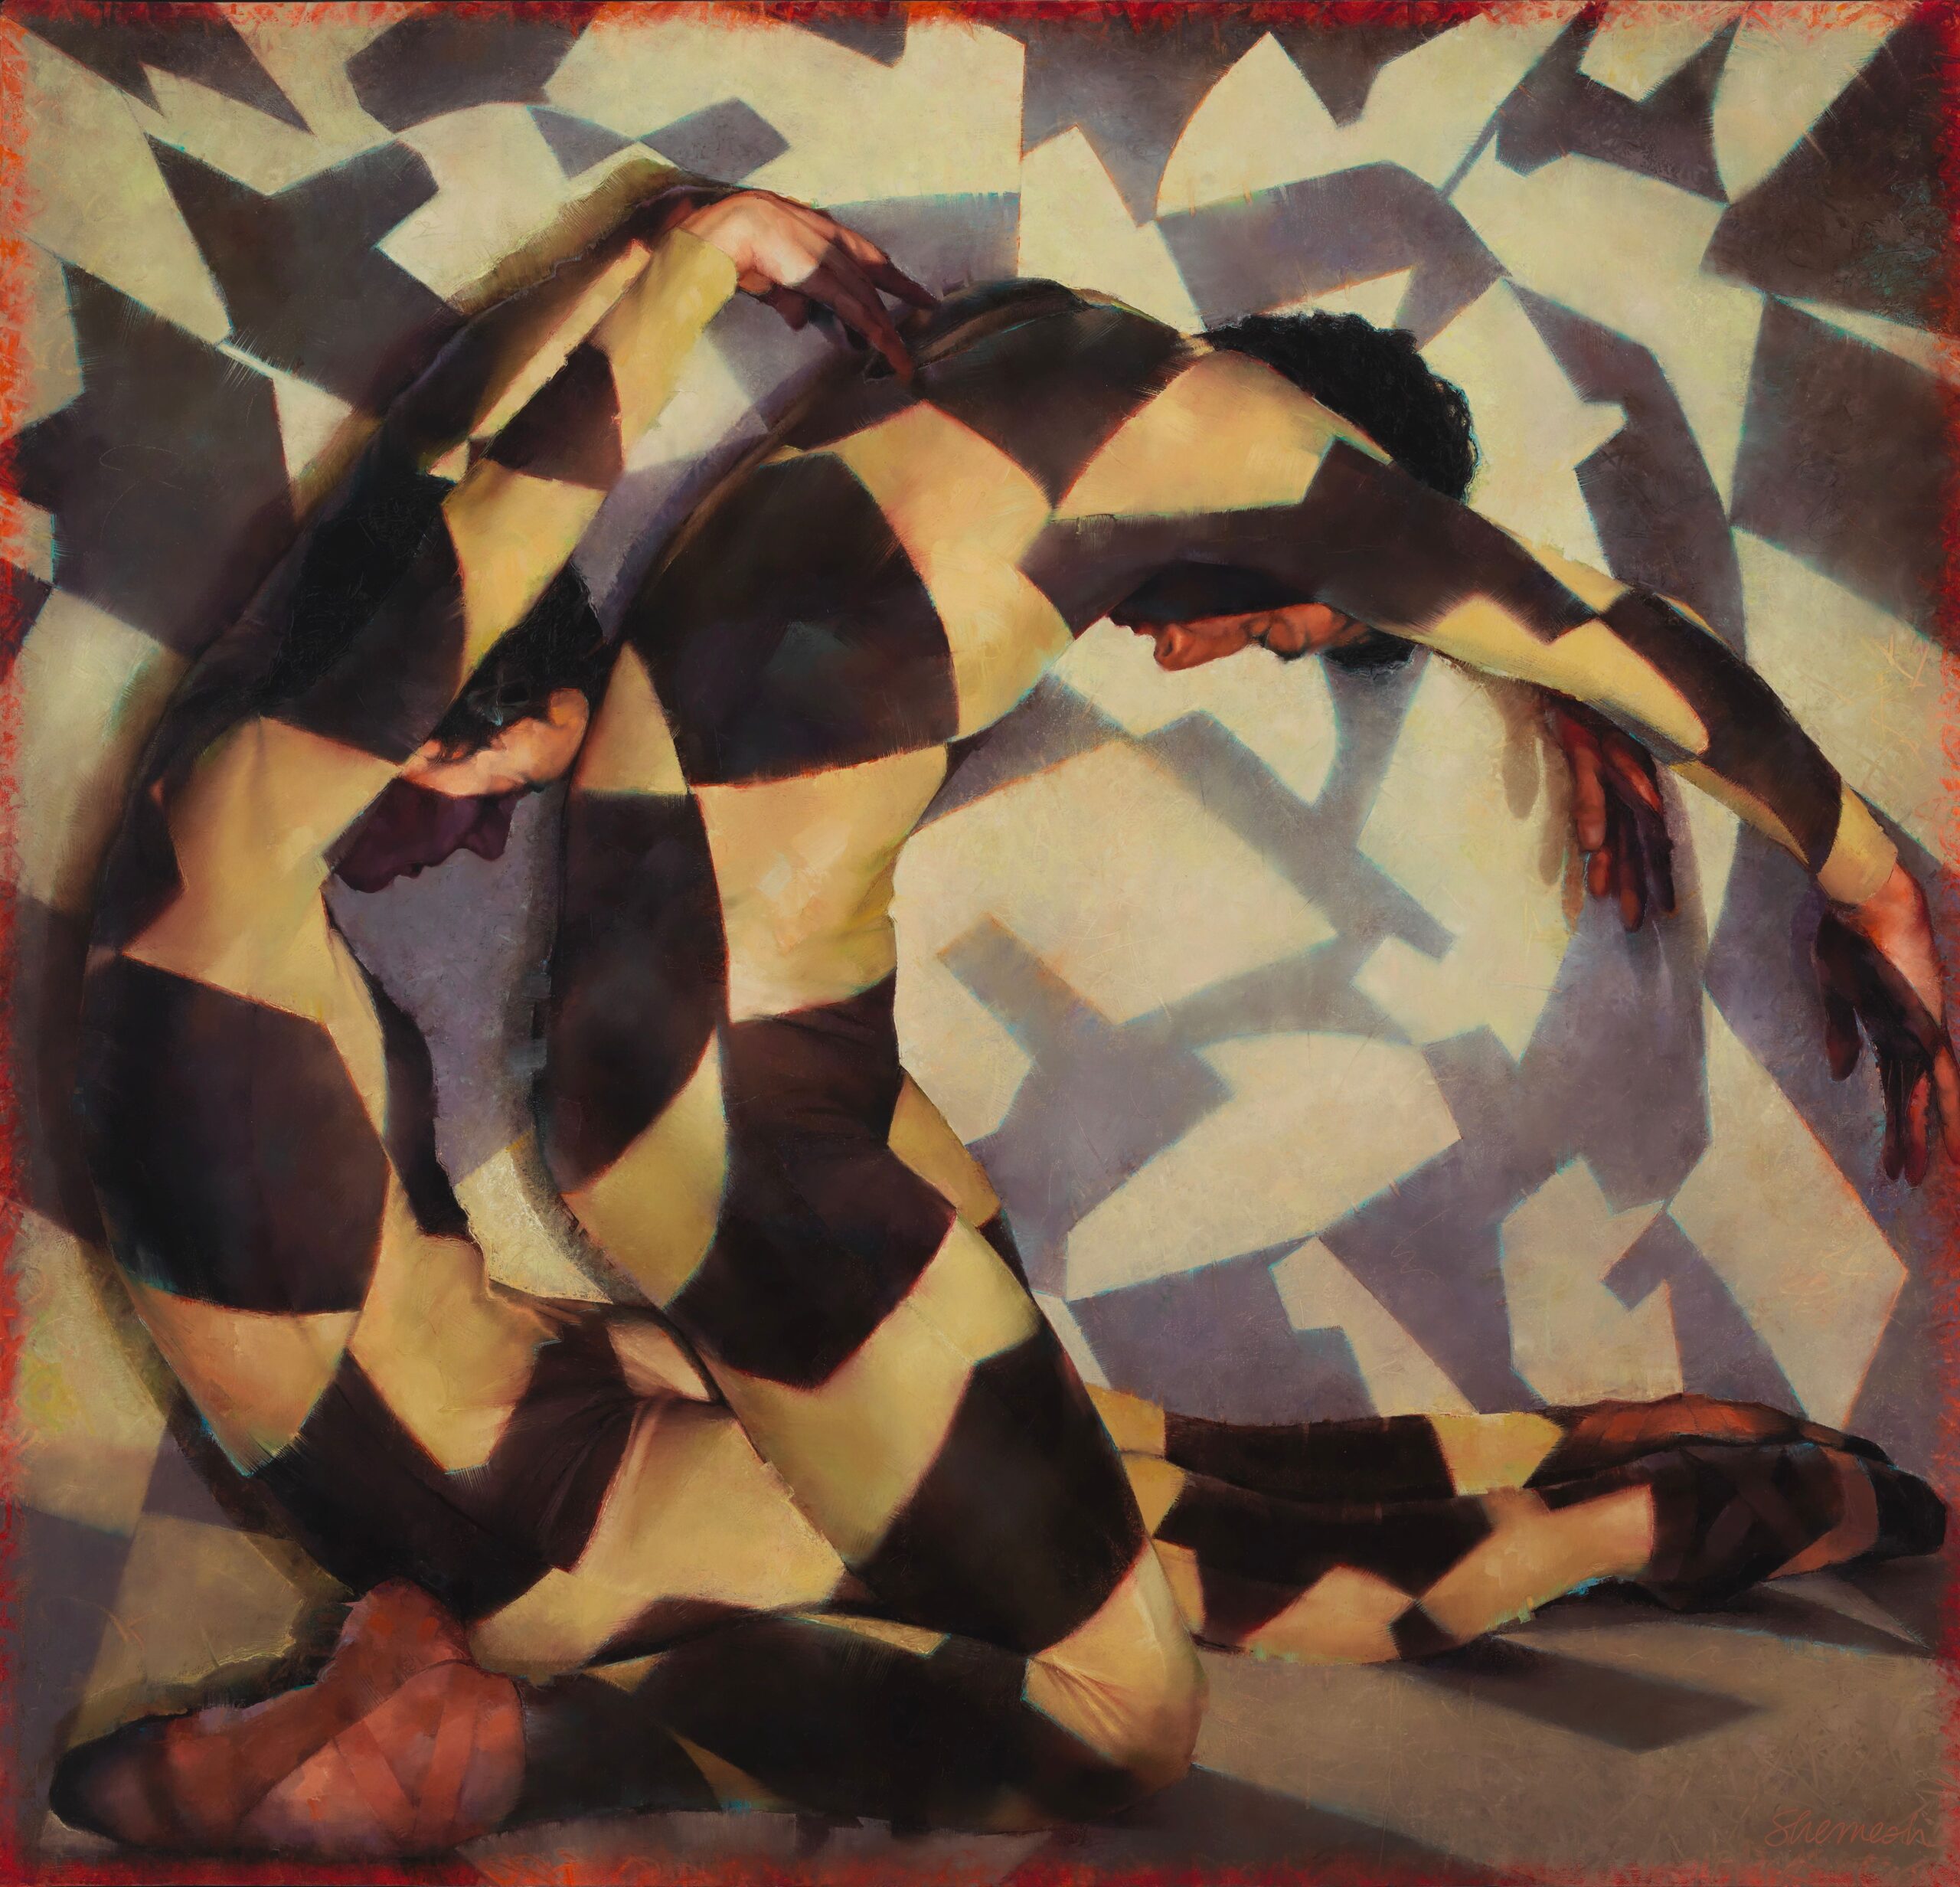 
							

									Lorraine Shemesh									Slide 2020									oil on canvas<br />
58 x 60 1/2 inches									


							